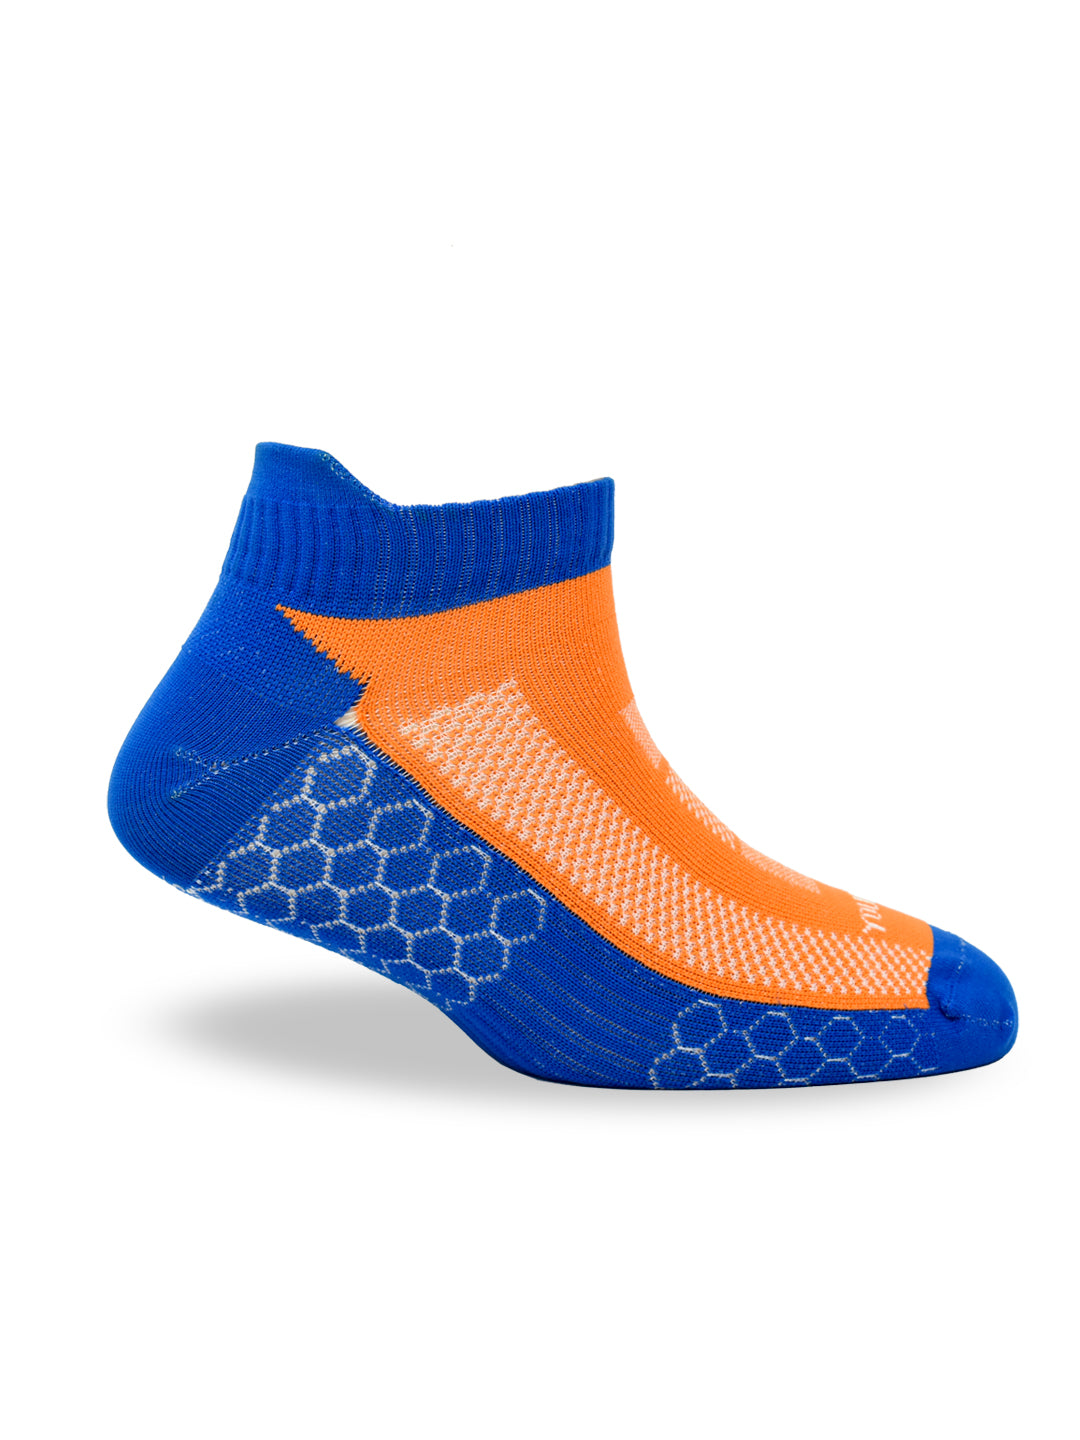 Young Wings Anti-Bacterial Dri-Fit Ankle Length Running Socks - Pack of 3 Pairs, Colour: Orange/Blue